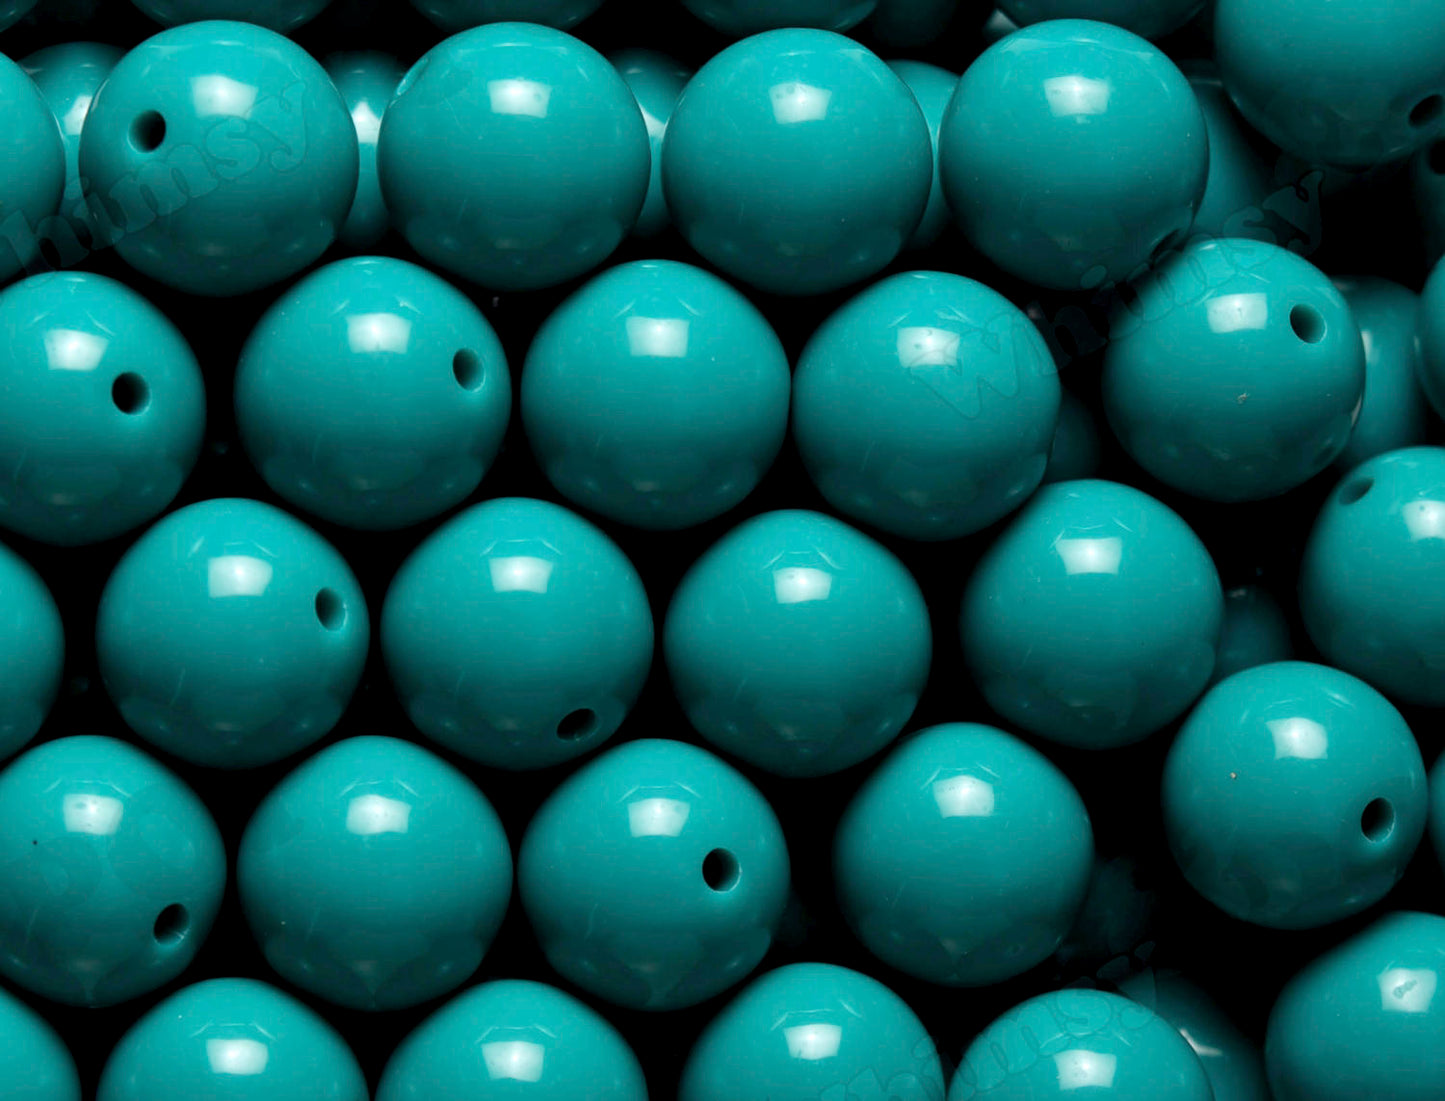 Teal 20mm Solid Bubblegum Beads for DIY Jewelry by WhimsyandPOP